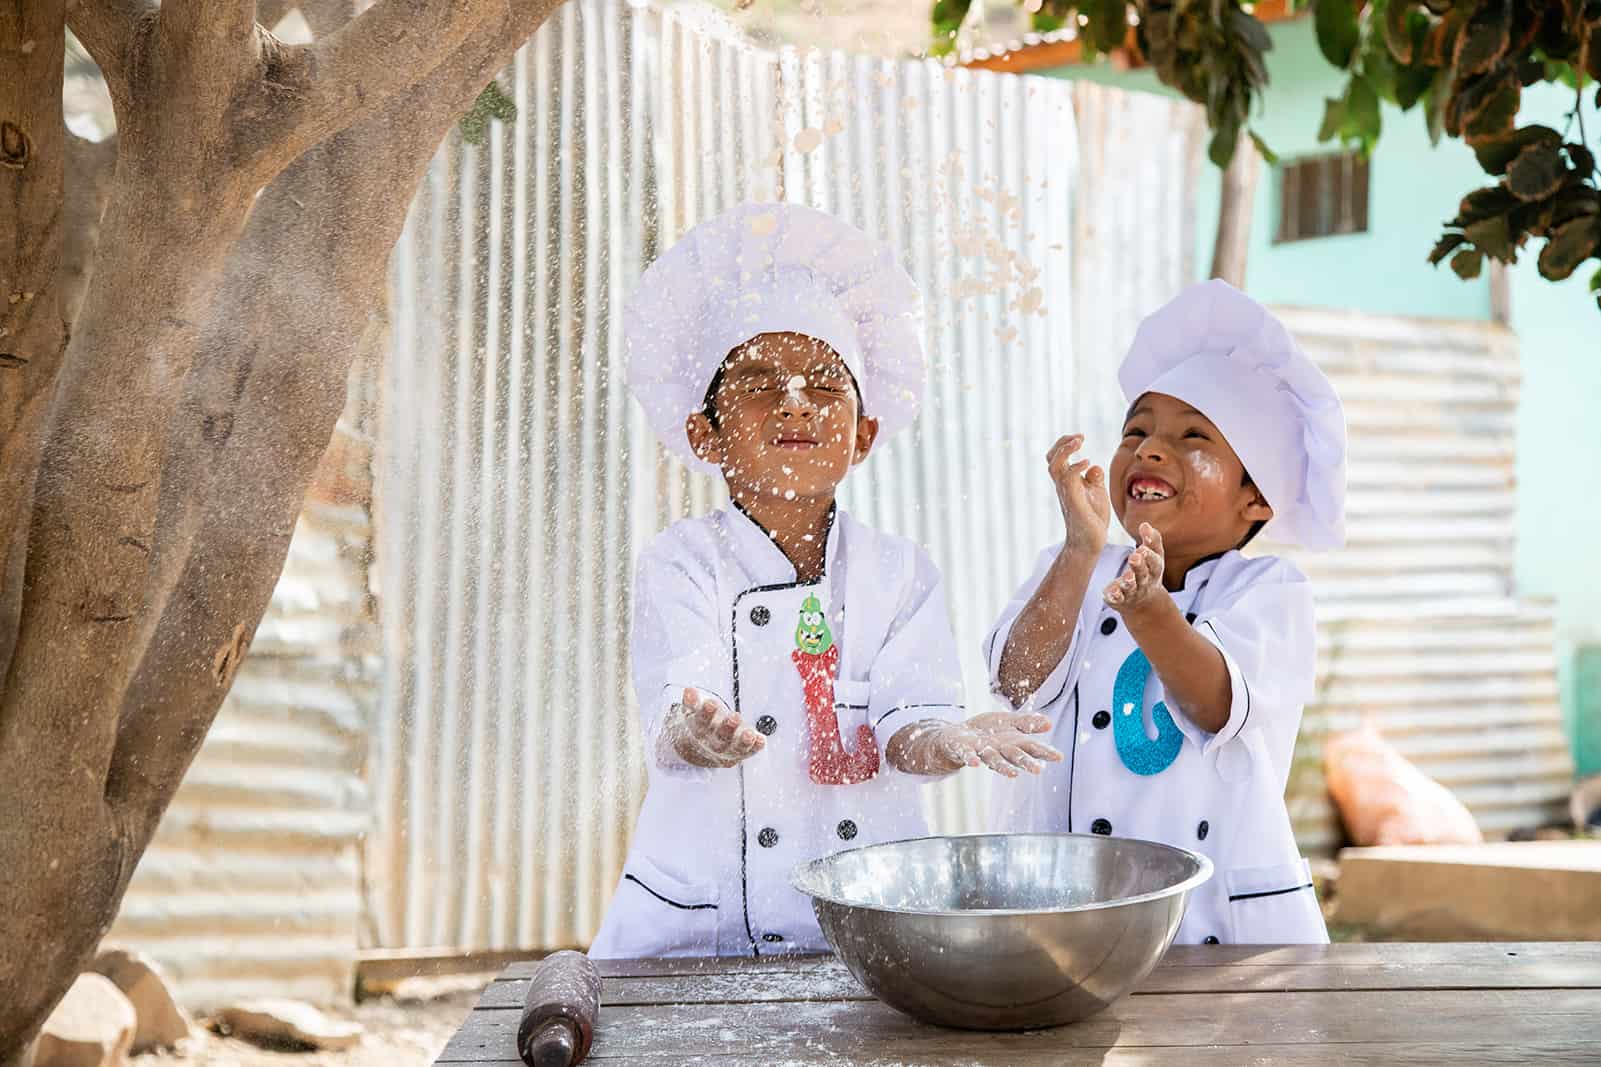 Two twin boys in Bolivia are wearing chef outfits and tossing flour into the air.